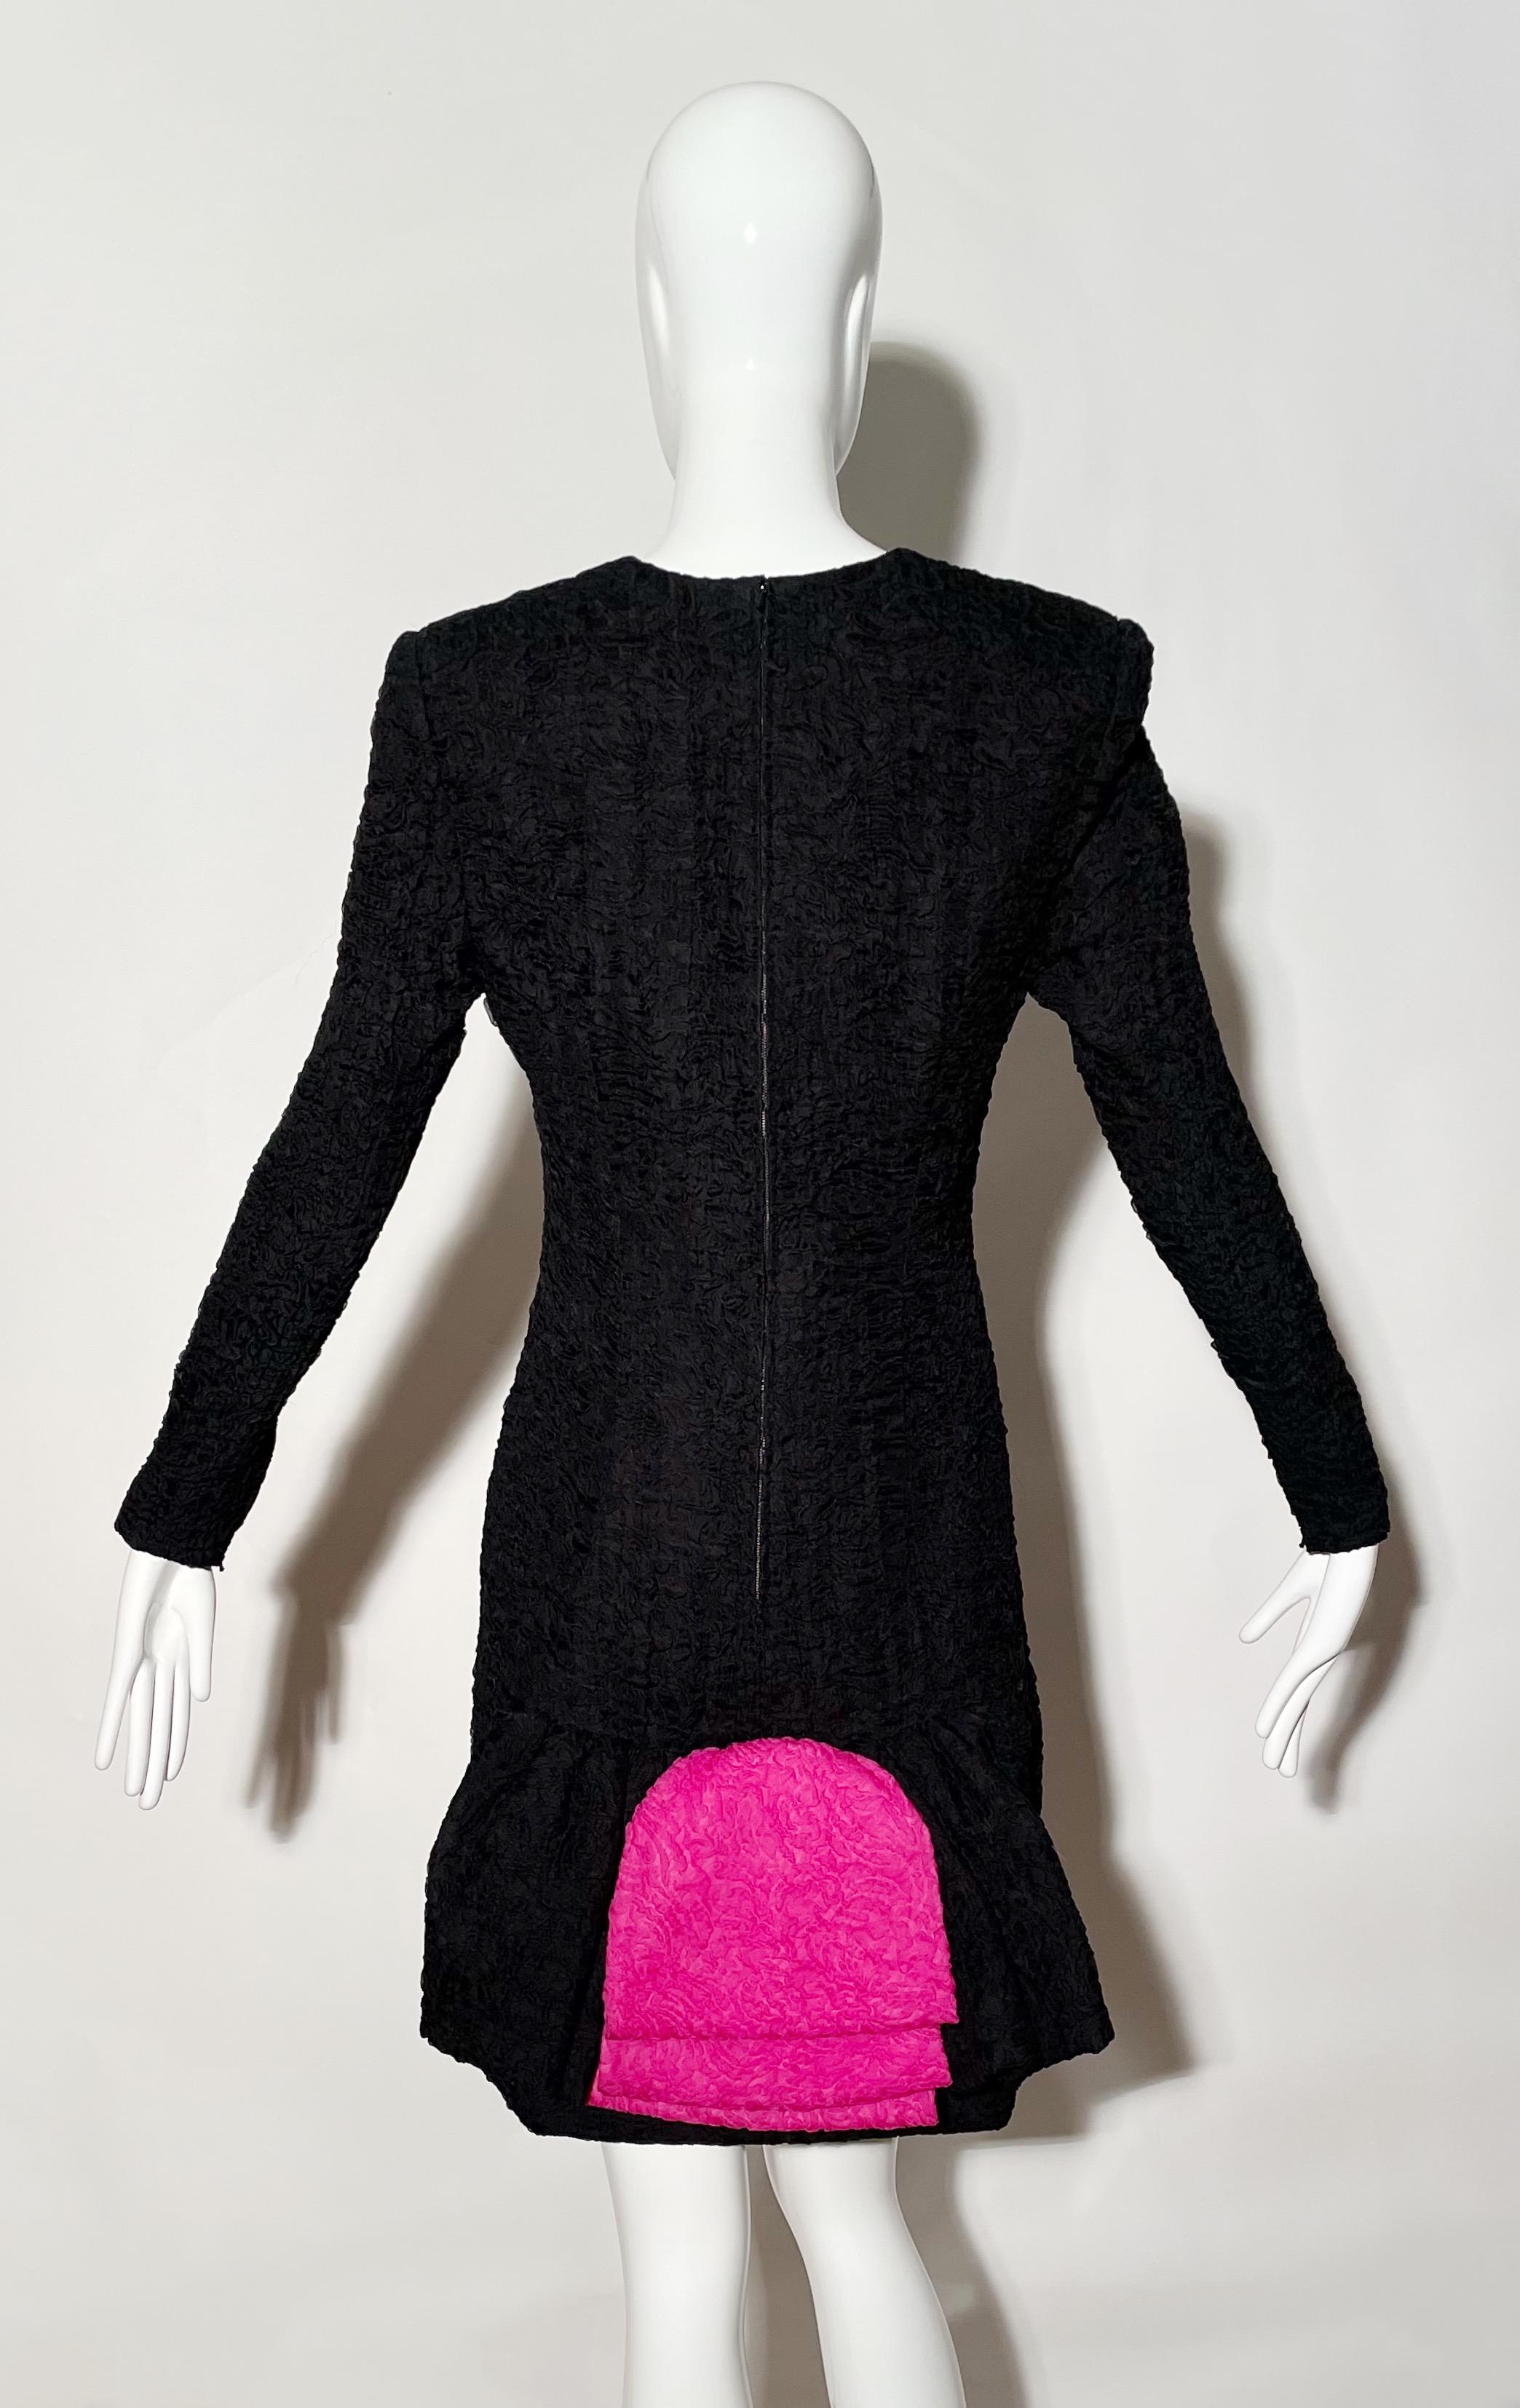 Black and pink cocktail dress. V-neck. Large rear bow detail. Rear zipper. Shoulder pads. Lined. Silk. Made in France. 
*Condition: excellent vintage condition. No visible flaws.

Measurements Taken Laying Flat (inches)—
Shoulder to Shoulder: 16